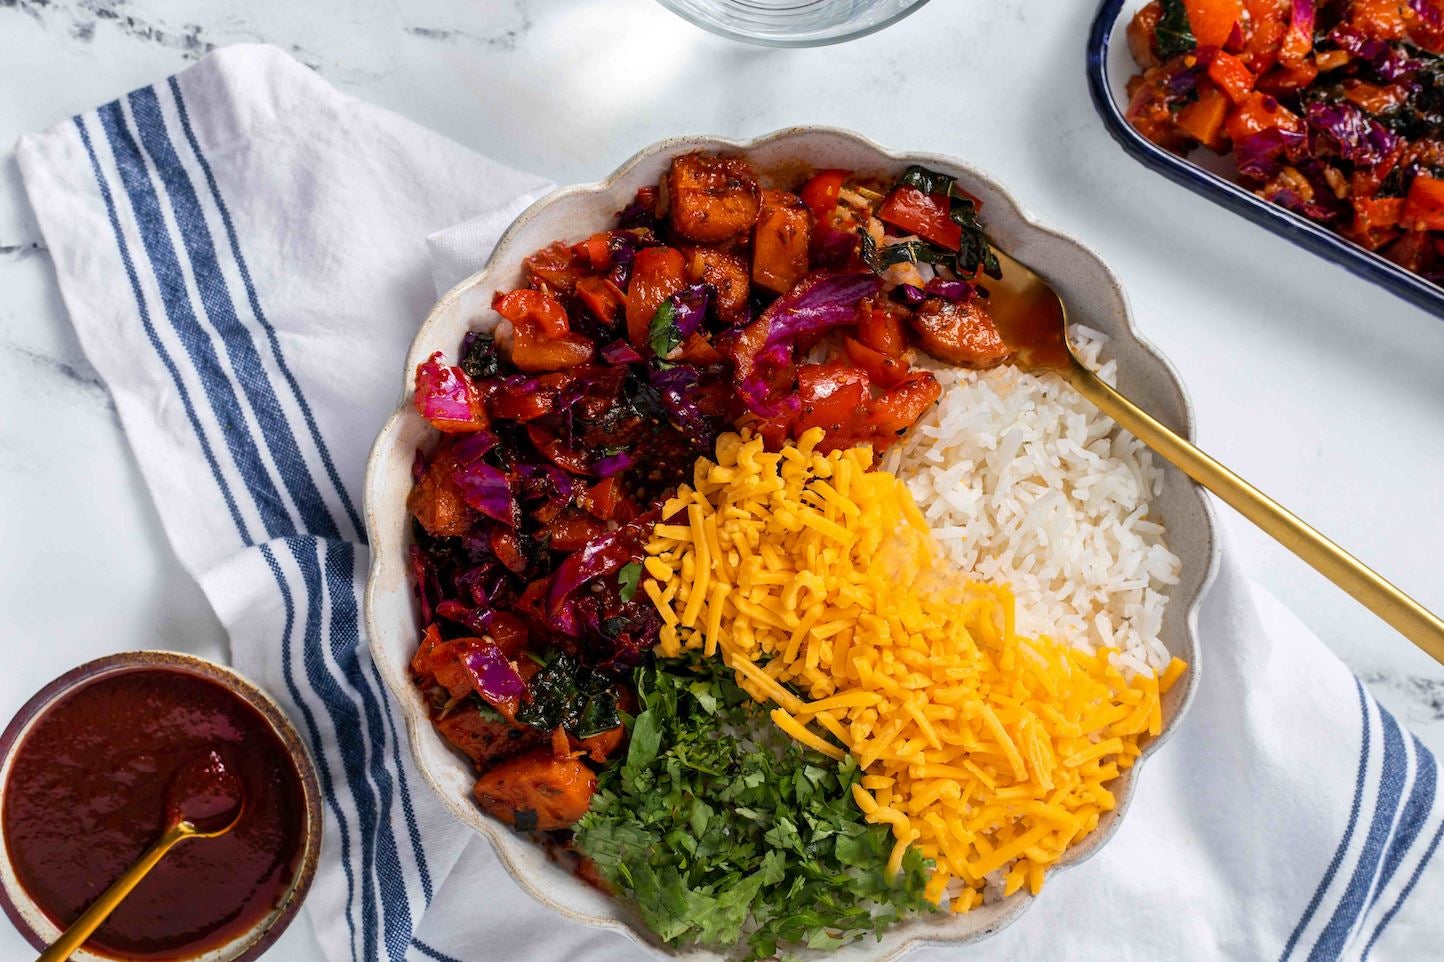 Image of a BBQ Buddha Bowl With Sweet Potato. This healthy vegetarian dinner is in a bowl with scalloped edges and contains a variety of vegetables, shredded cheese and rice, as well as a gold-coloured spoon. The bowl rests on a blue and white napkin.